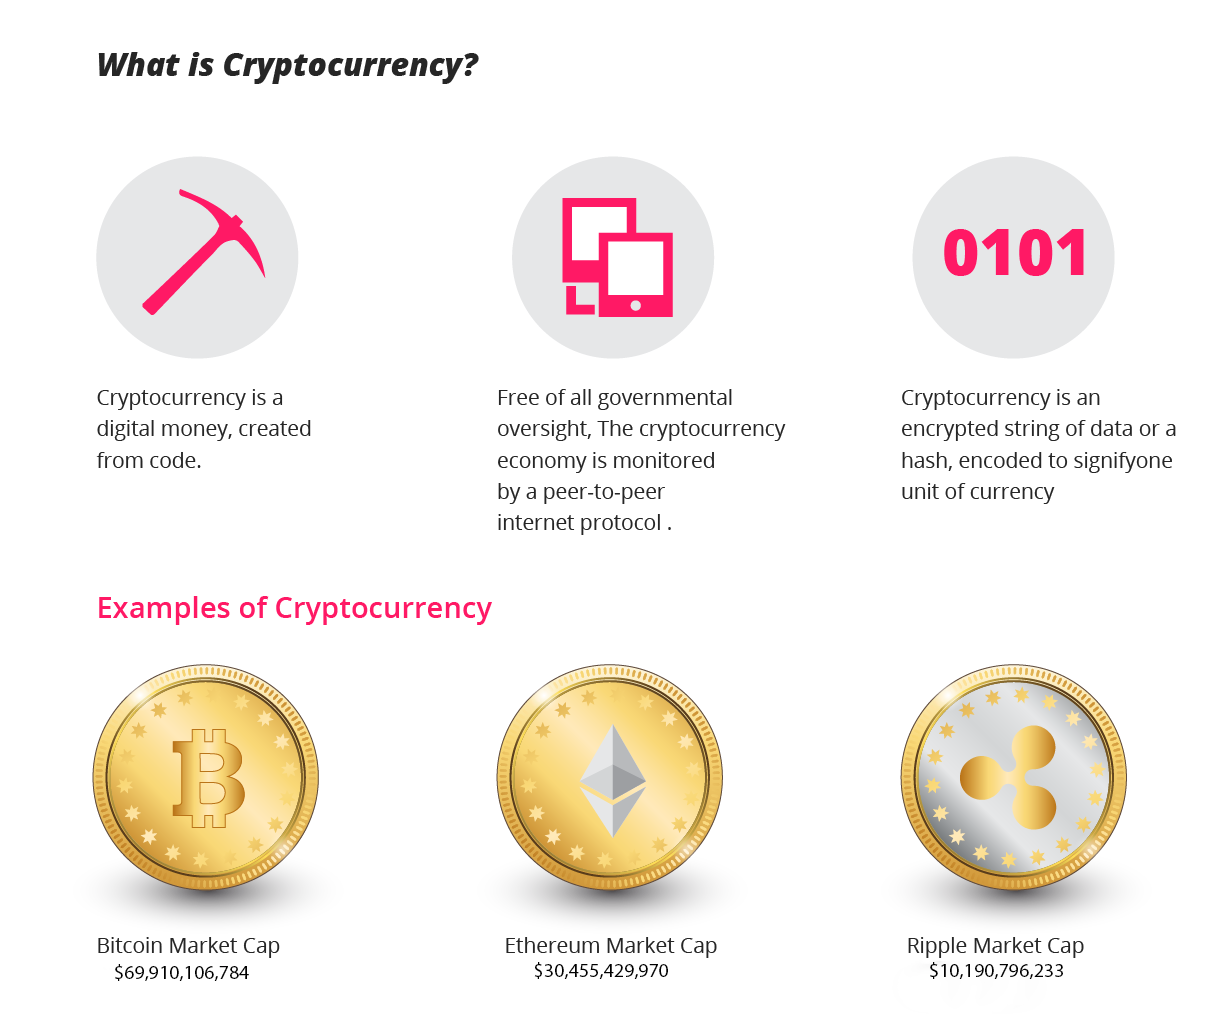 what is cryptocurrencies meaning